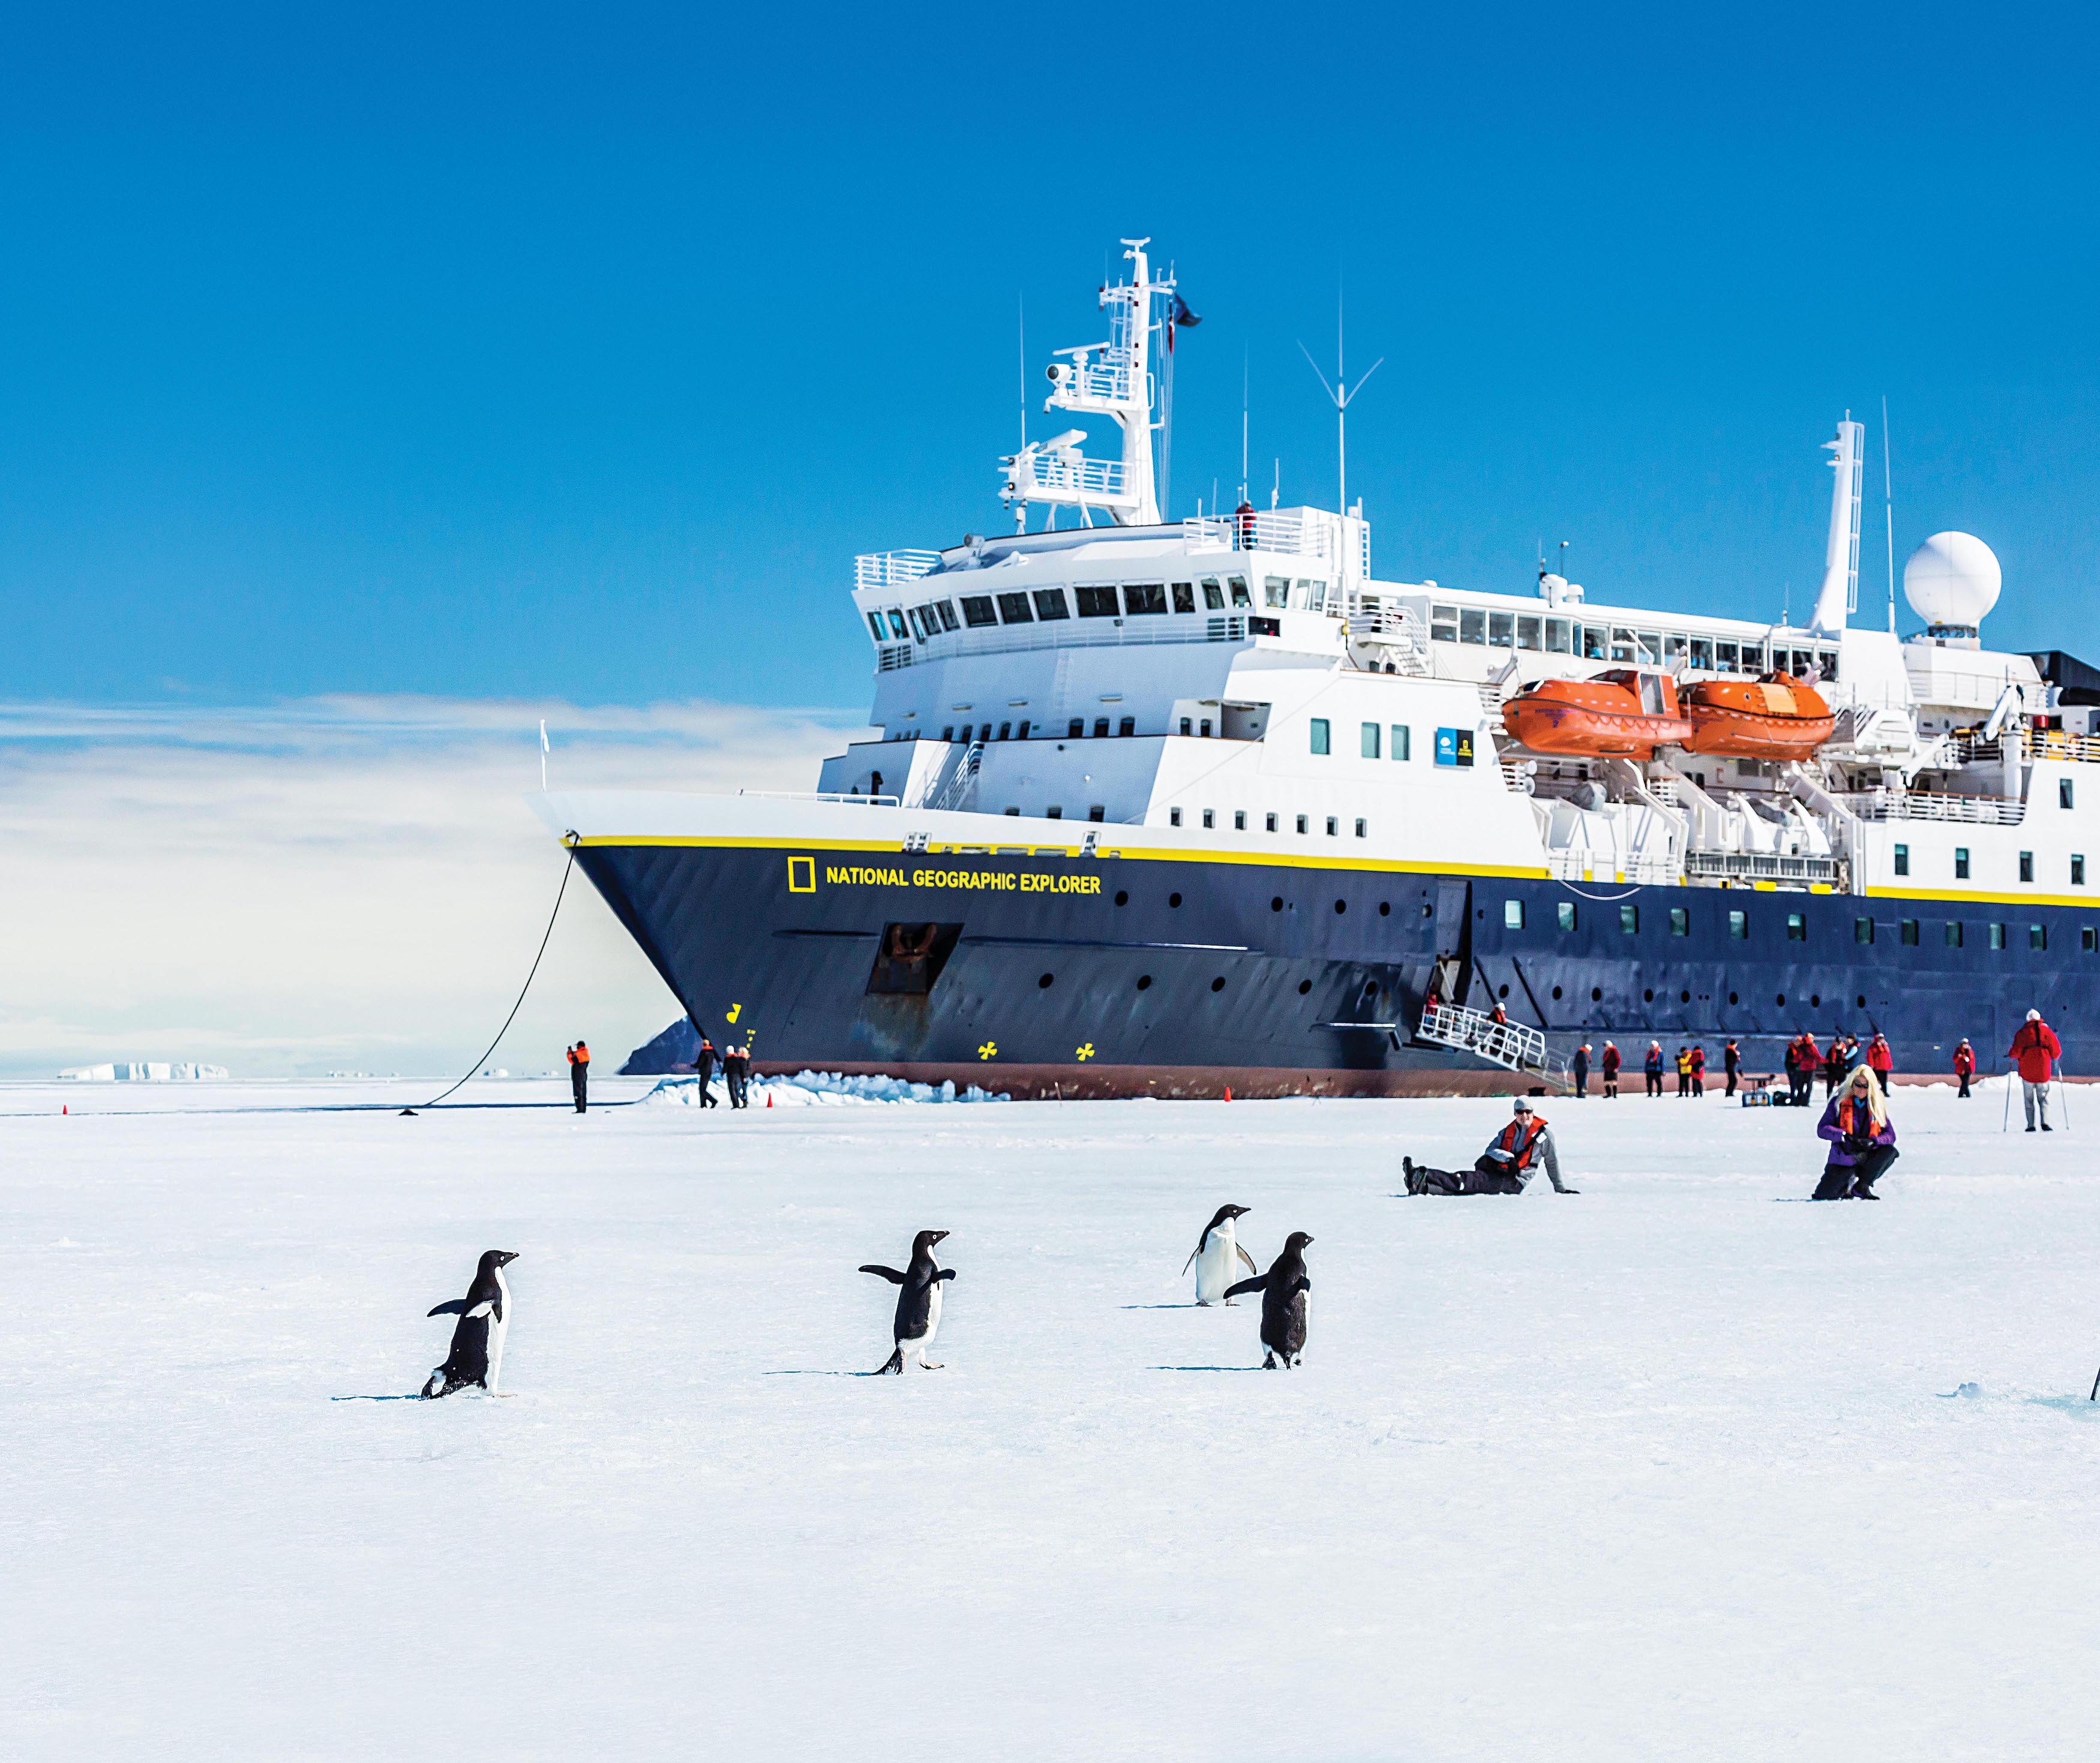 nat geo expeditions cruise